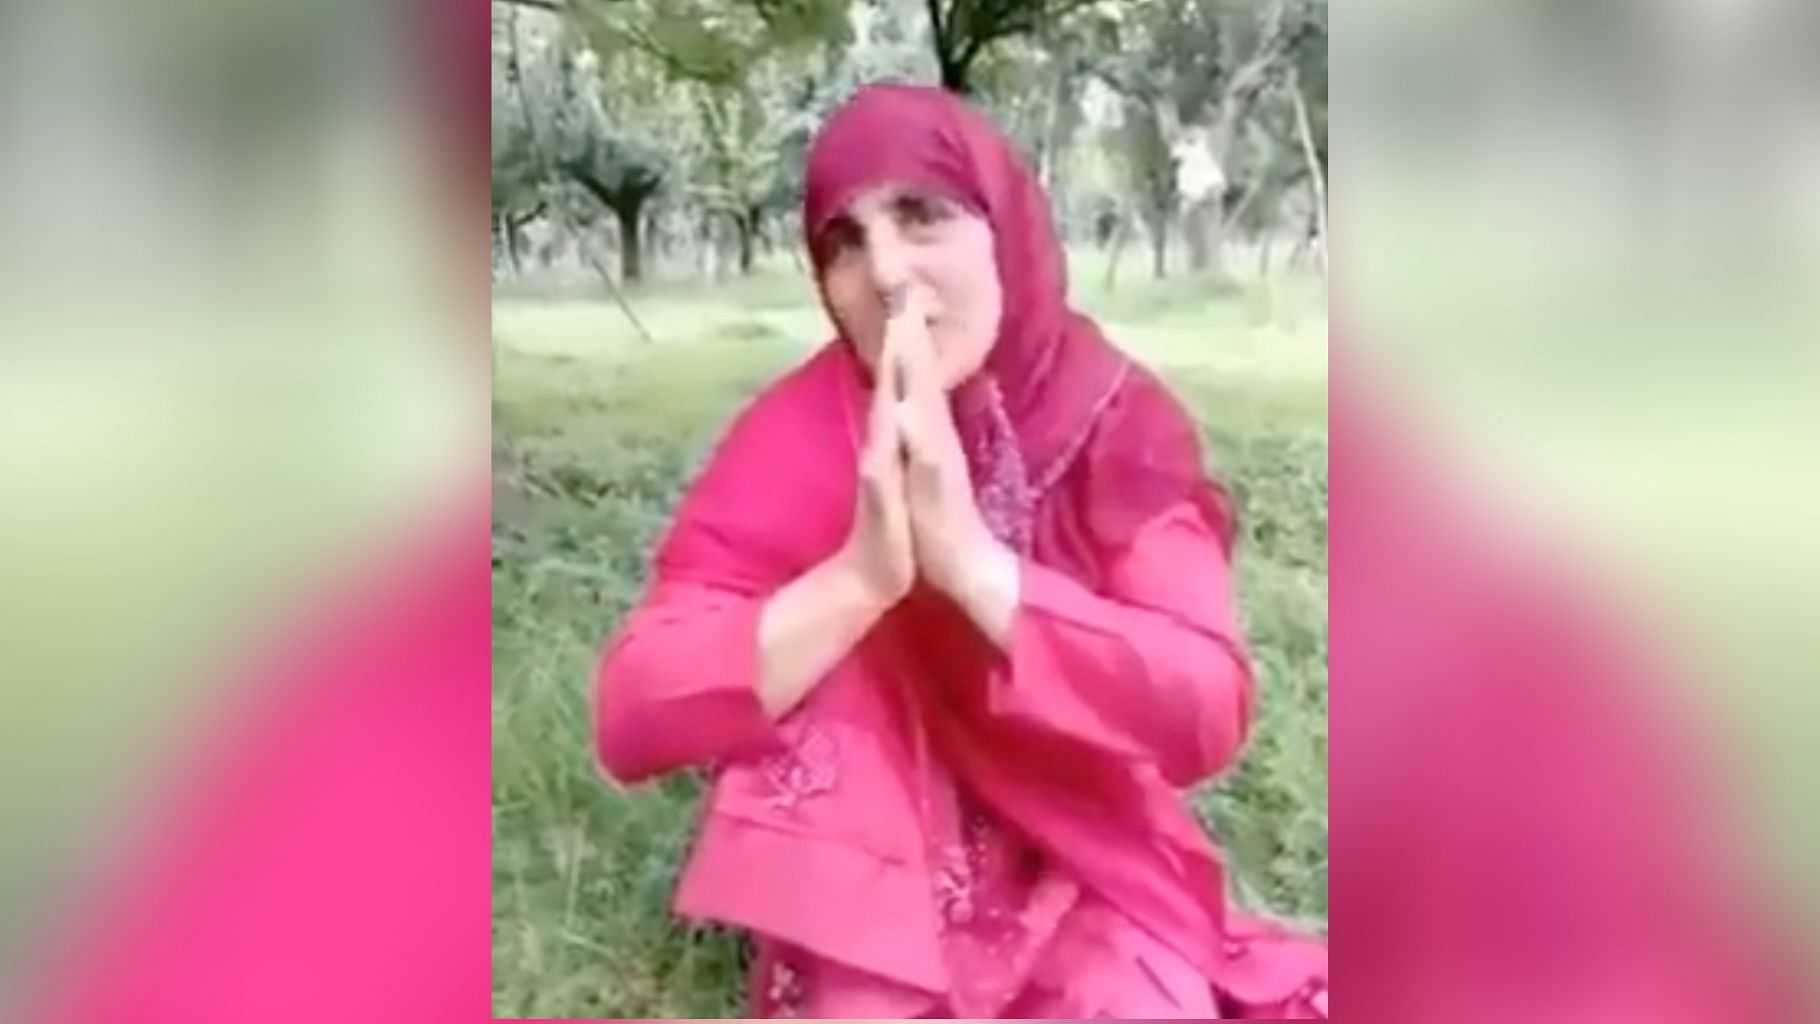 A video of a woman sarpanch of Sopore announcing her decision to step down, while in the captivity of suspected militants, has gone viral on social media in Kashmir.